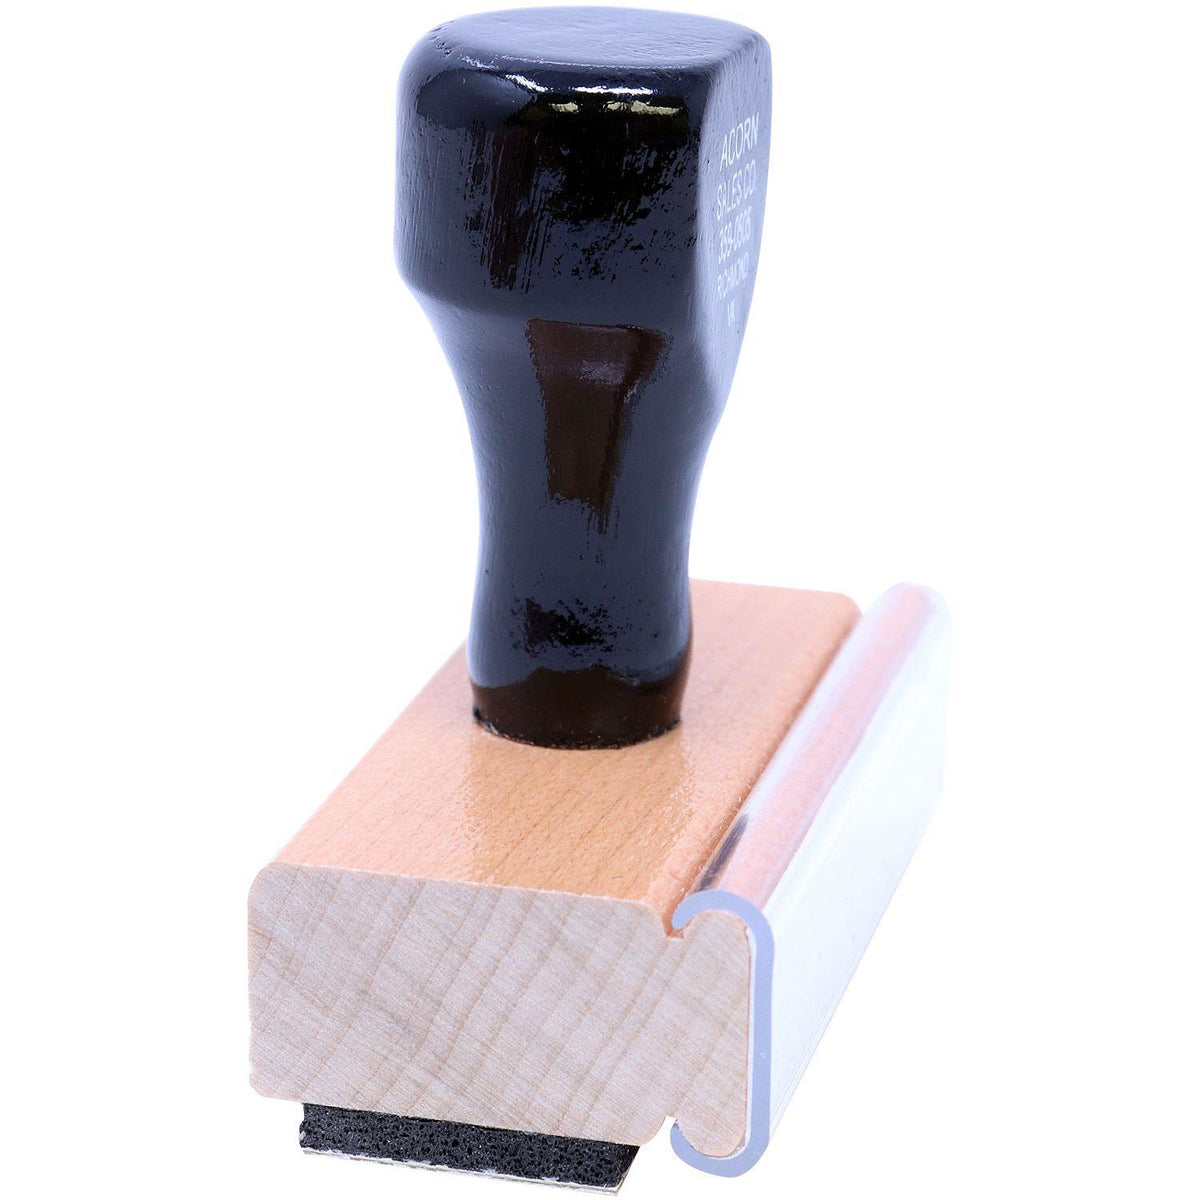 Side View of Due Date Rubber Stamp at an Angle